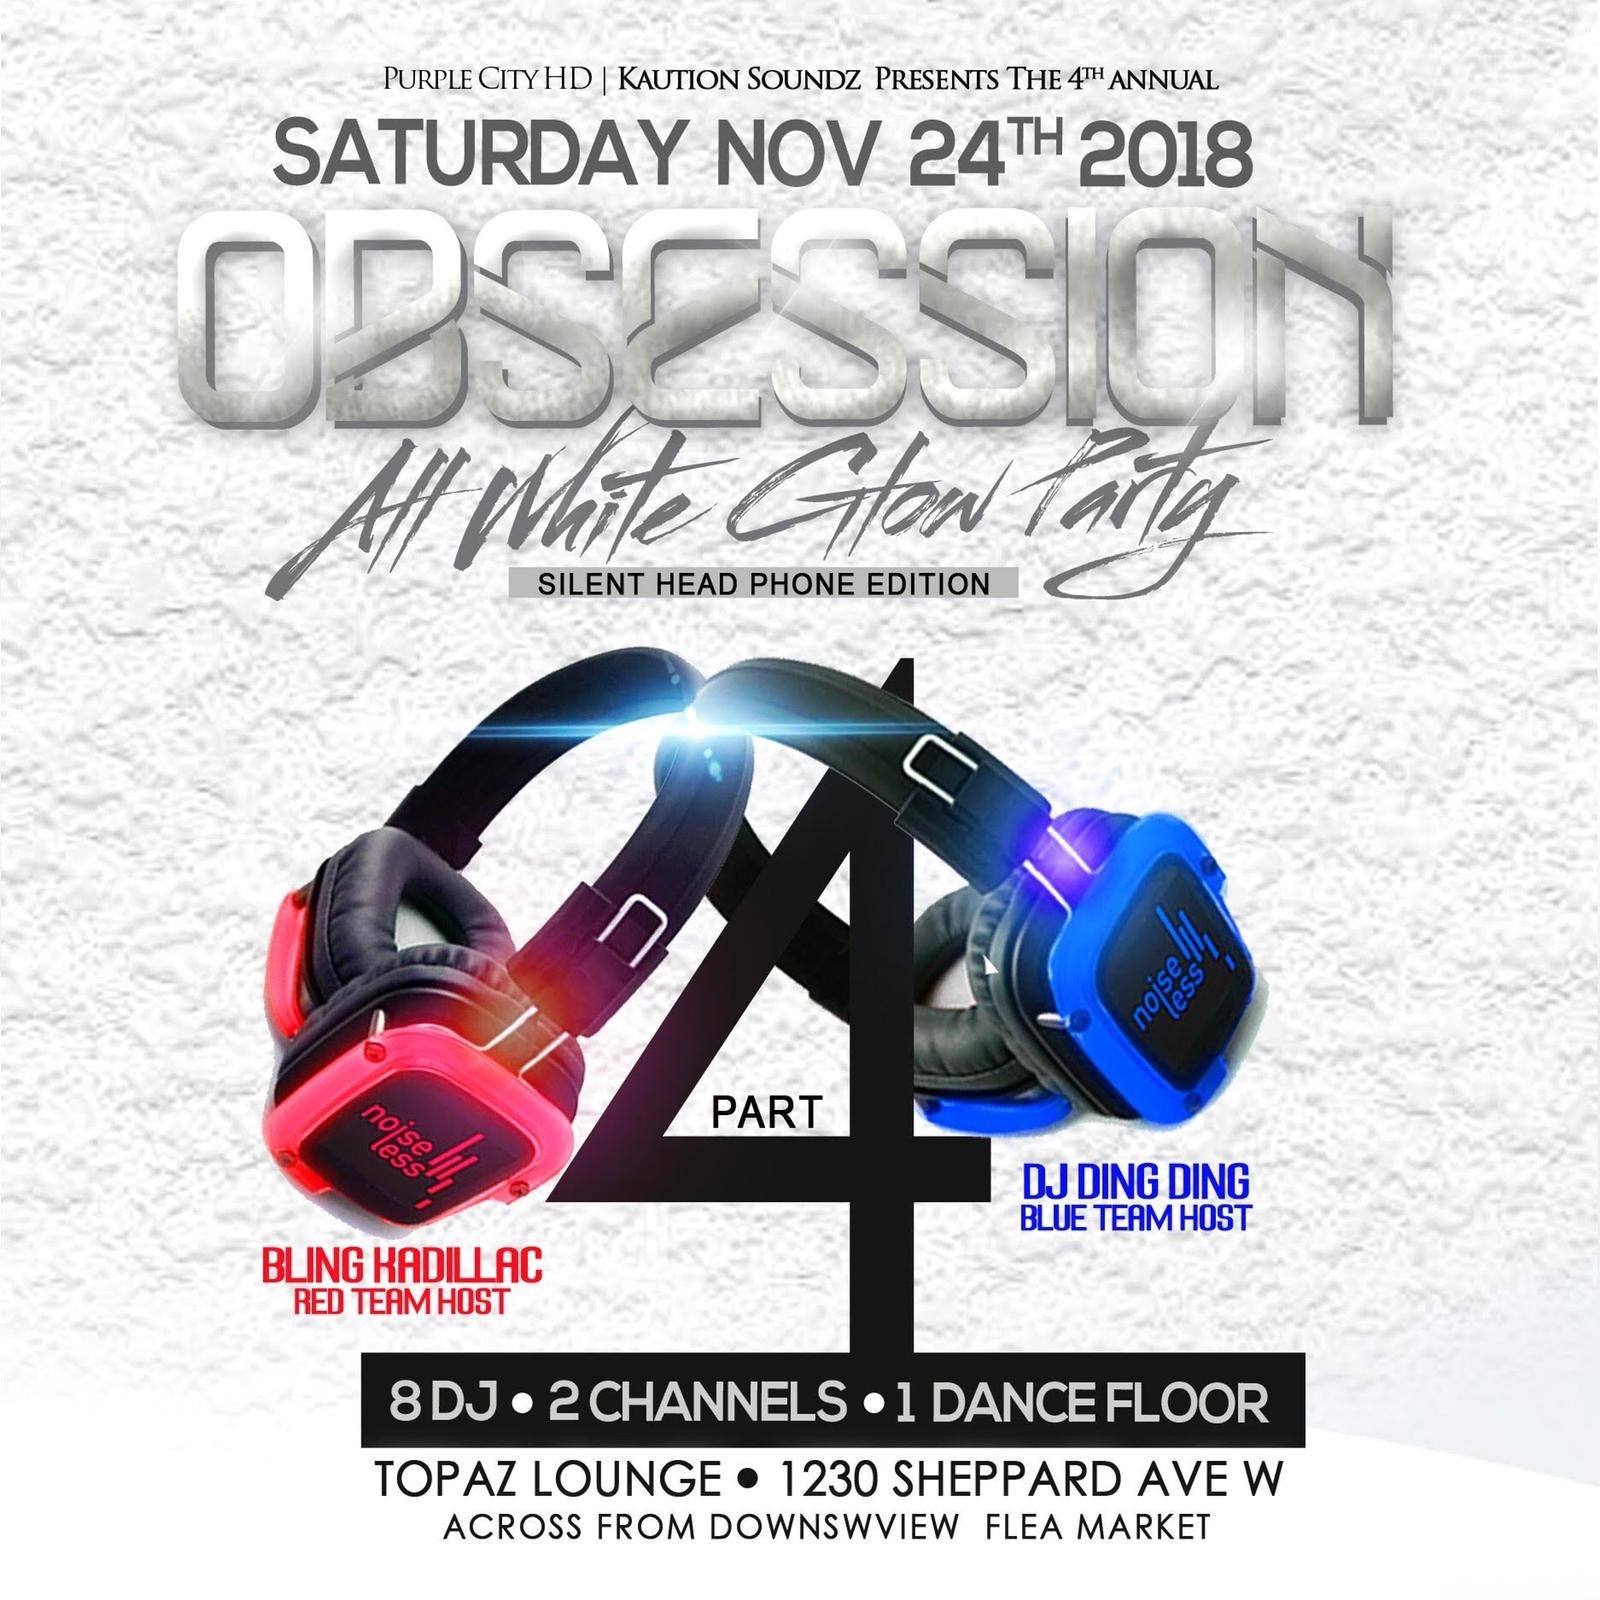 Obsession 4\All White Glow Party